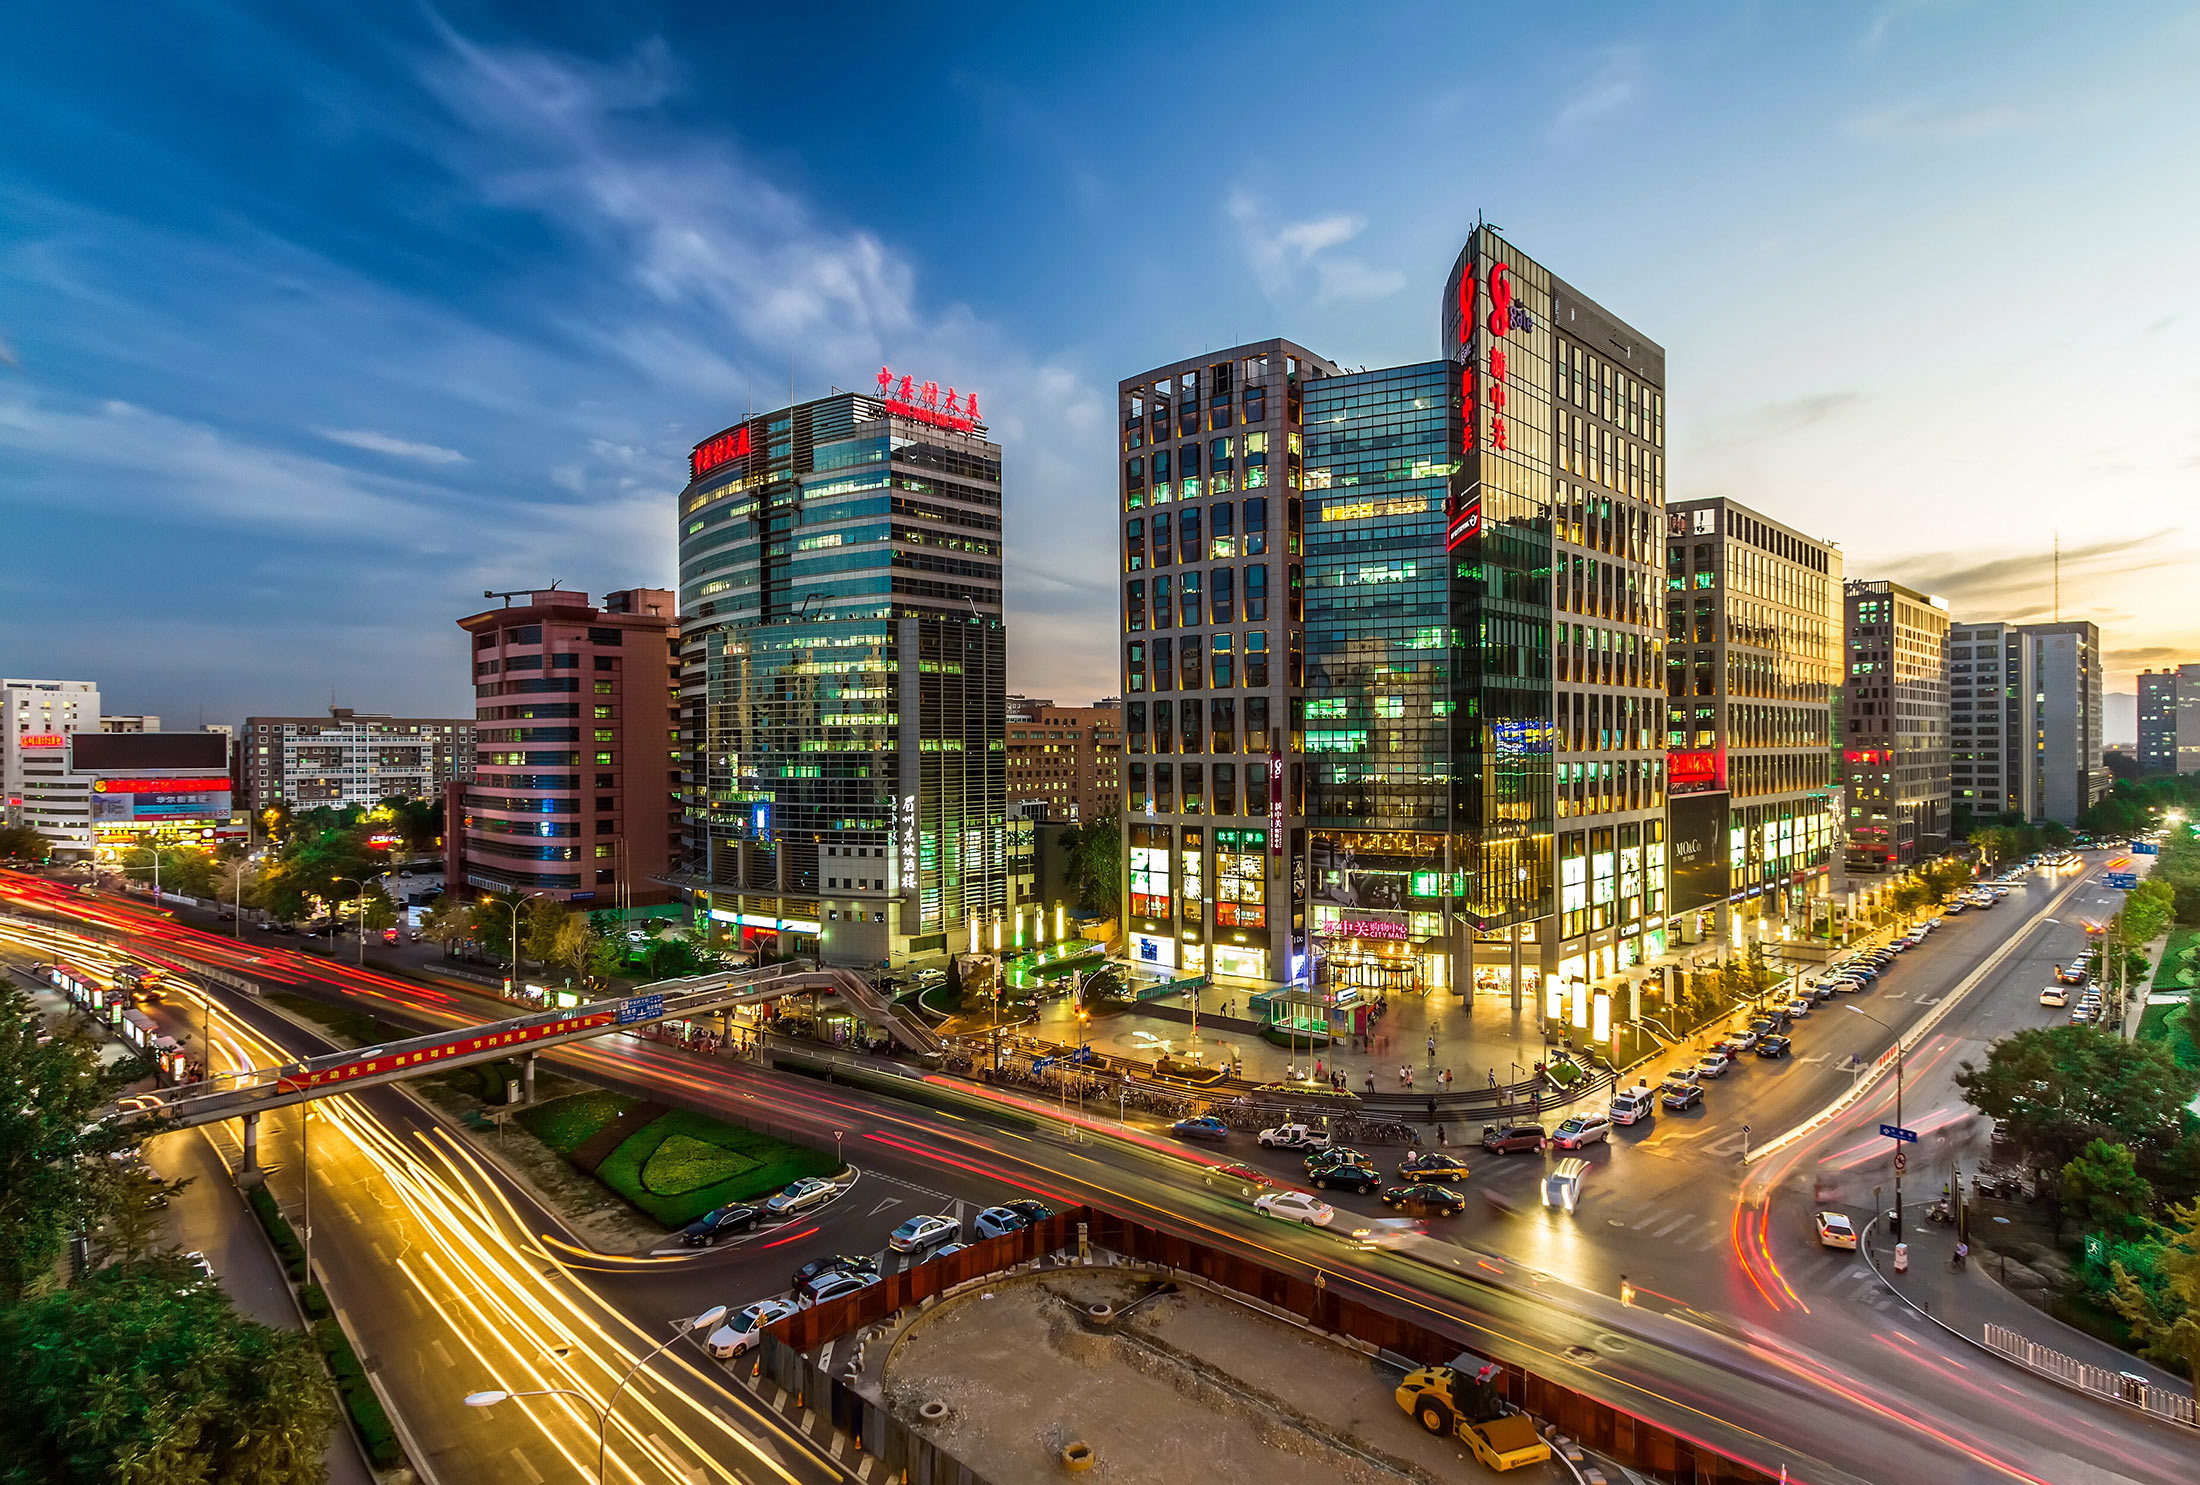 Beijing’s Zhongguancun high-tech district, known as China’s Silicon Valley.
